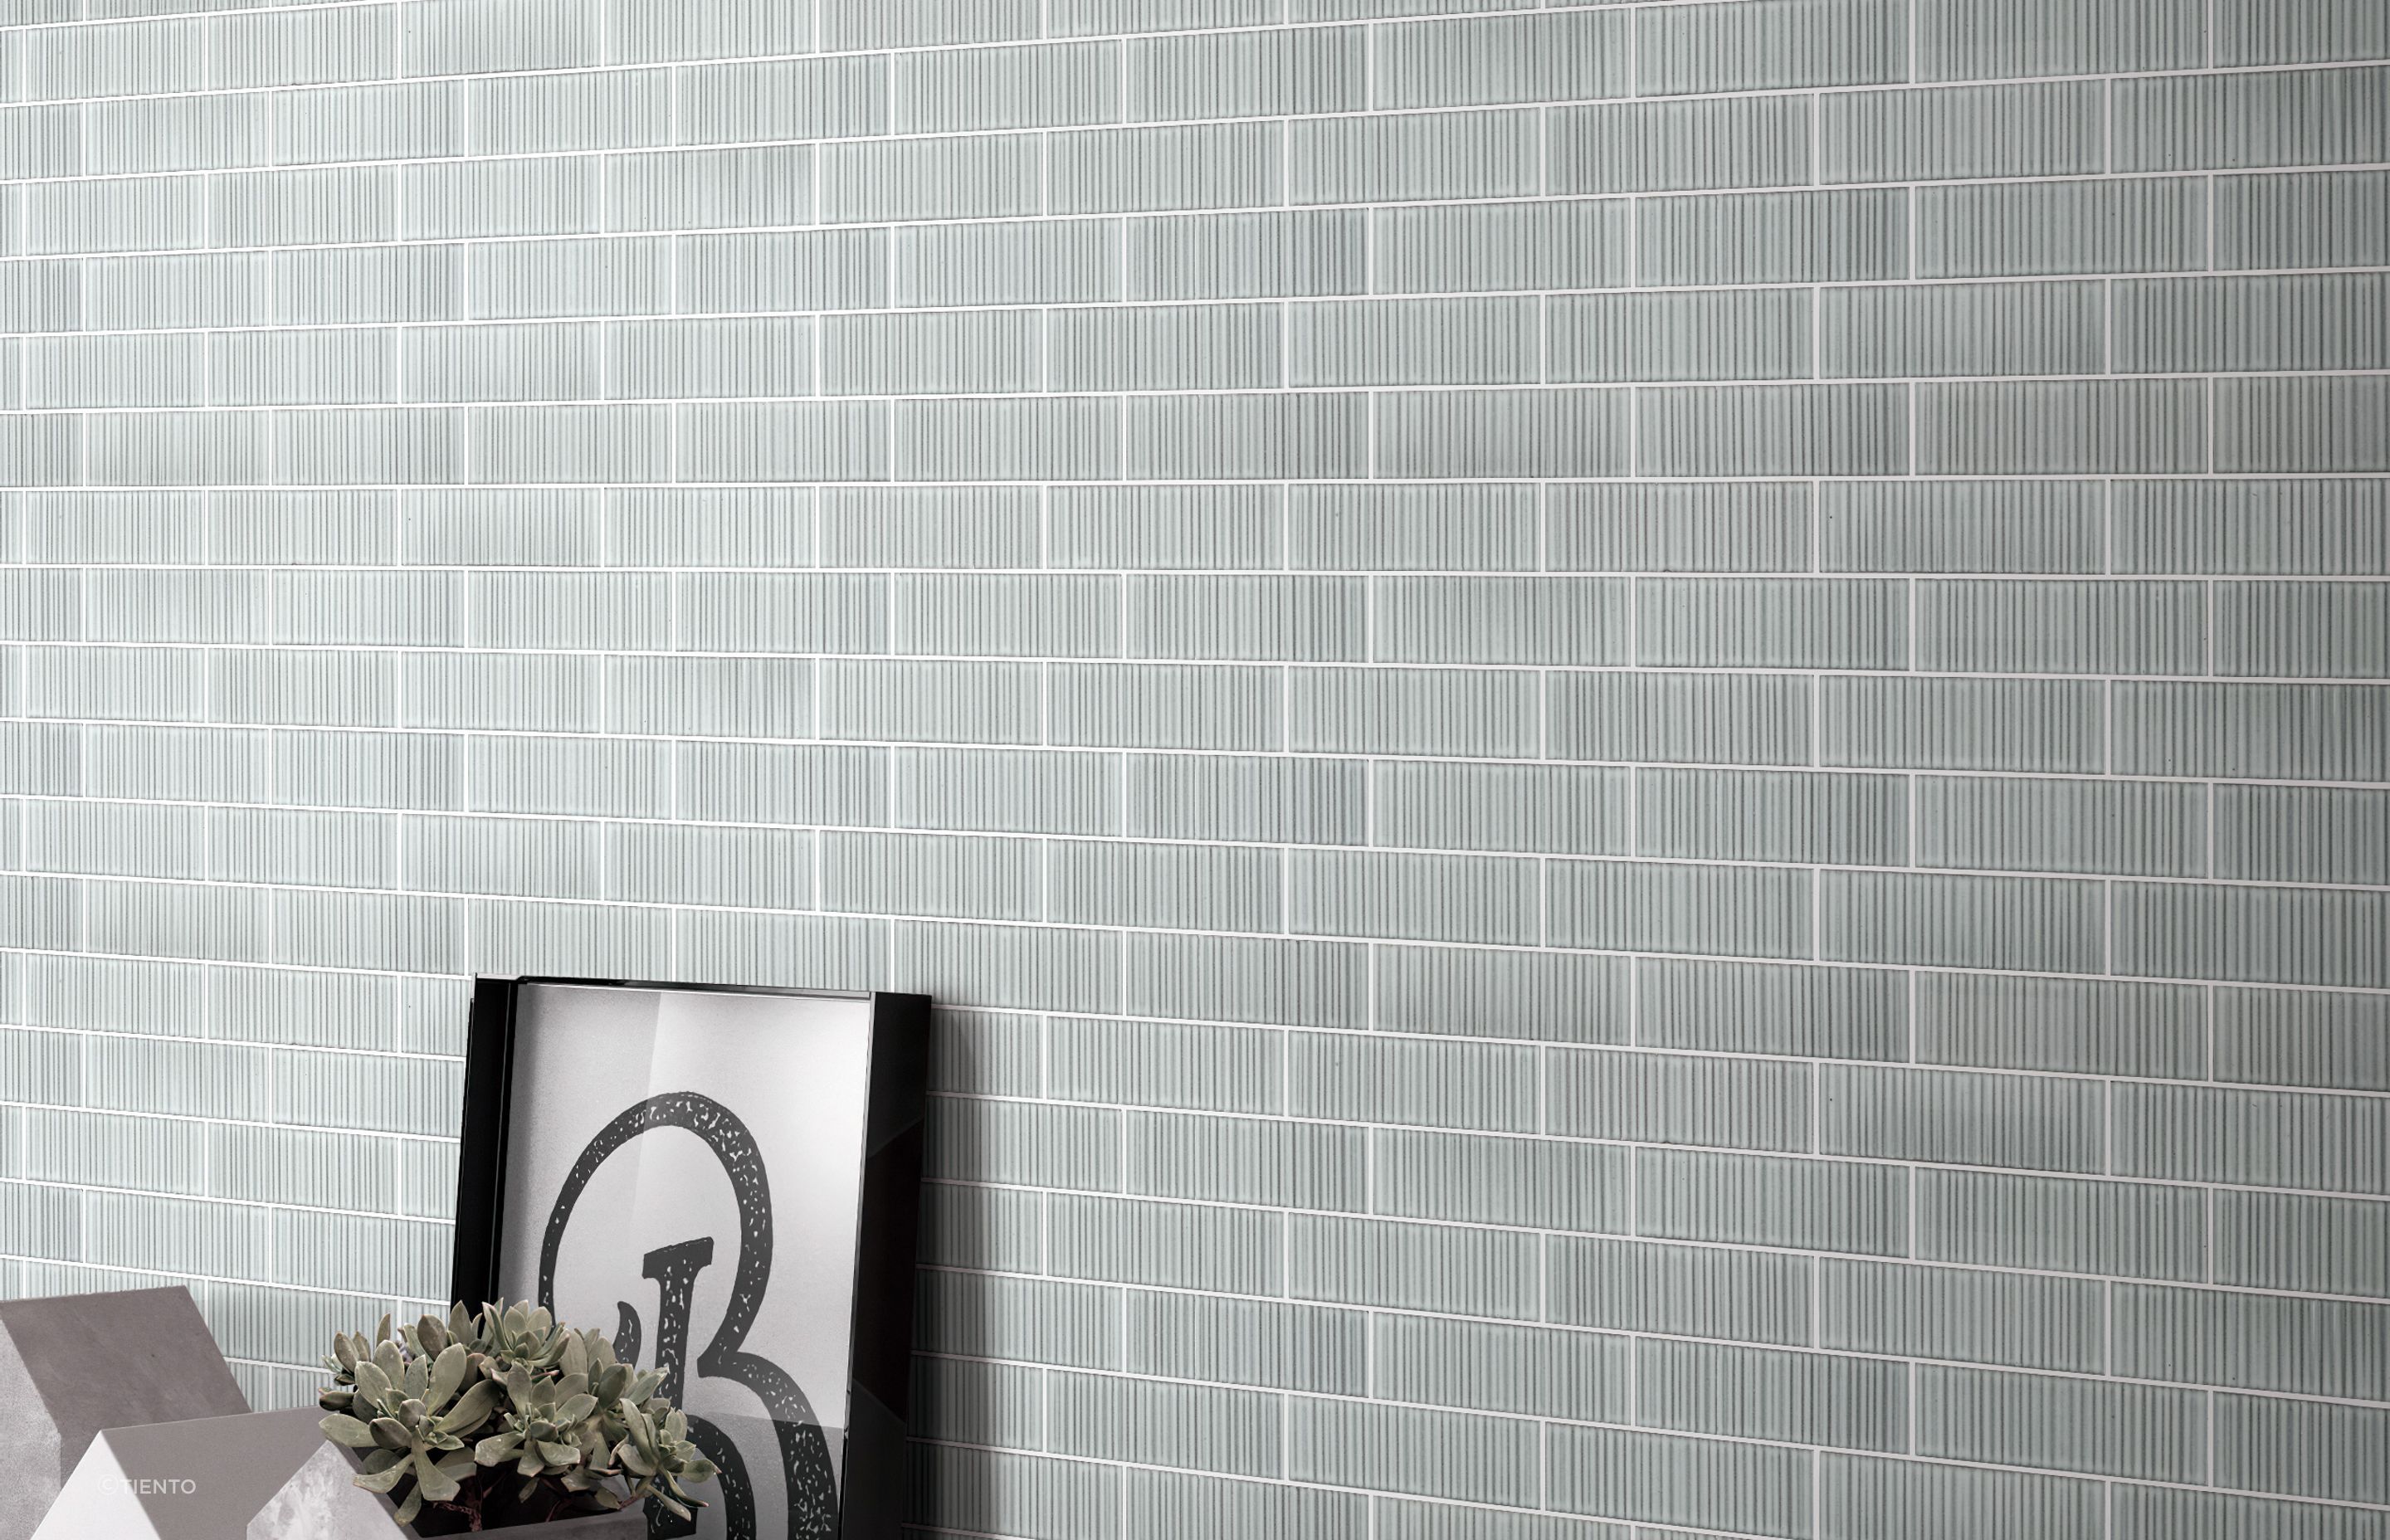 Featured Product: Nara Mosaic Series Tiles - Tiento